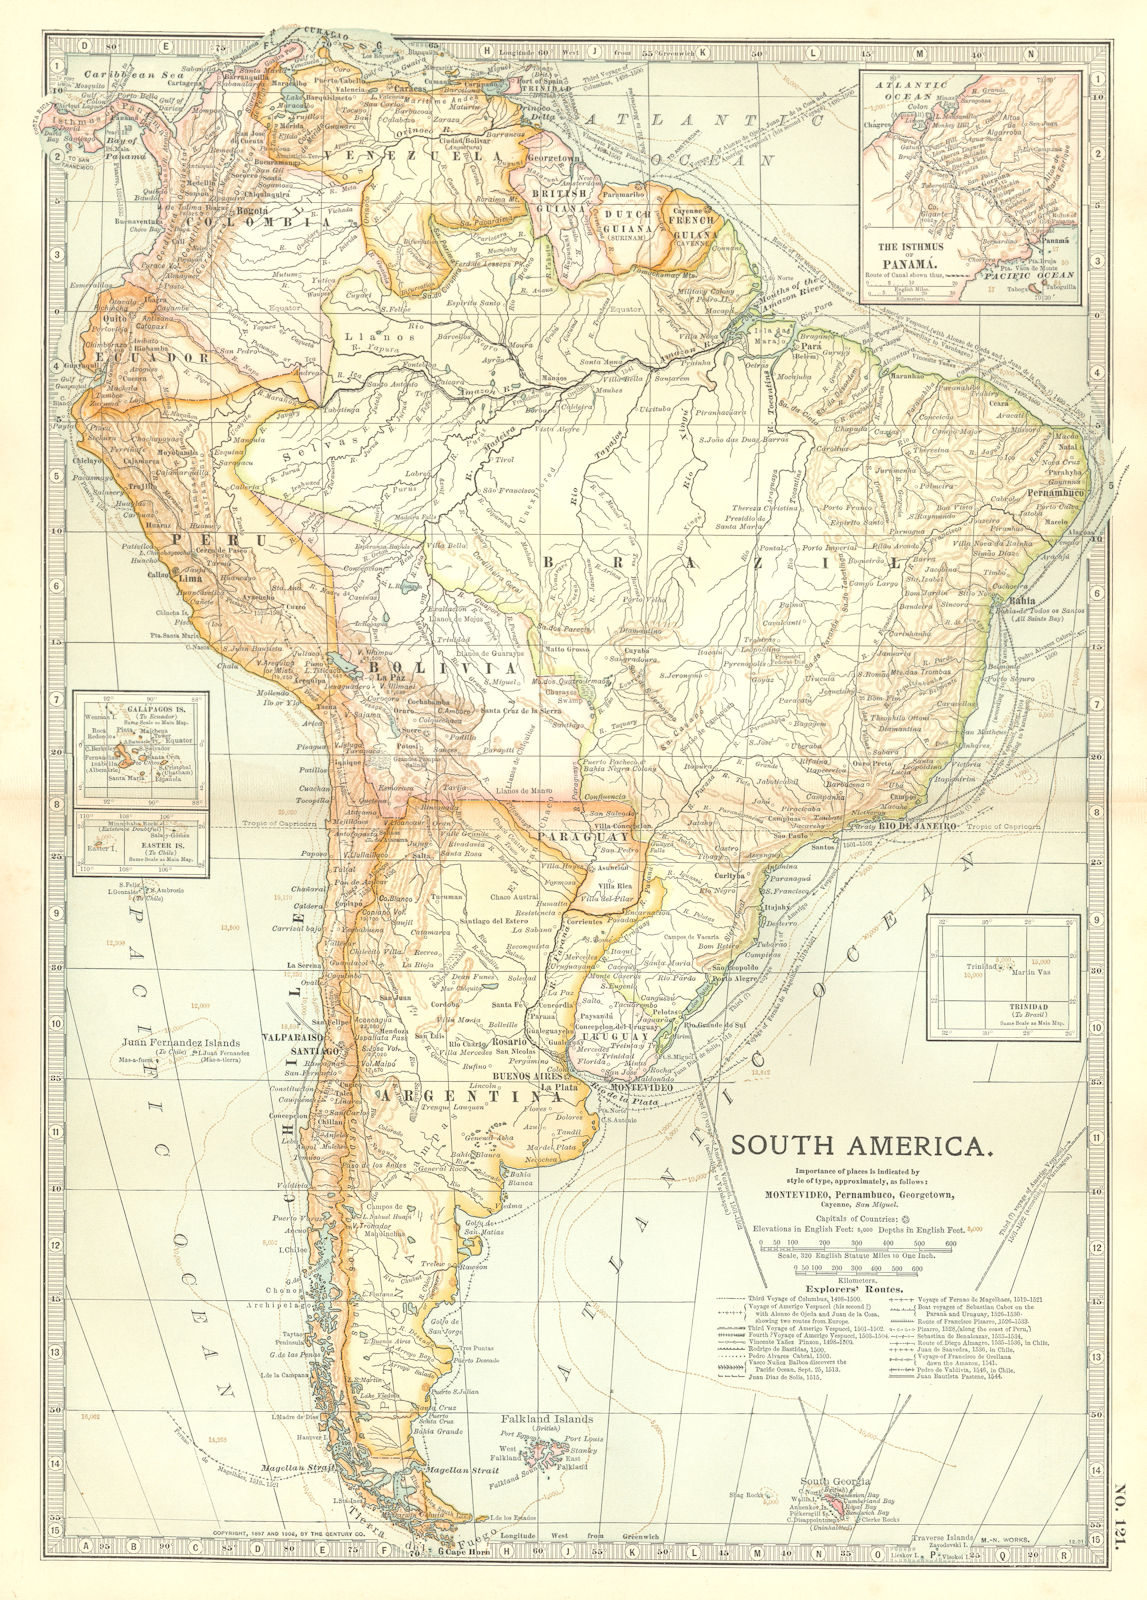 SOUTH AMERICA. Shows explorers routes.Columbus Vespucci Cabot Cabral+ 1903 map